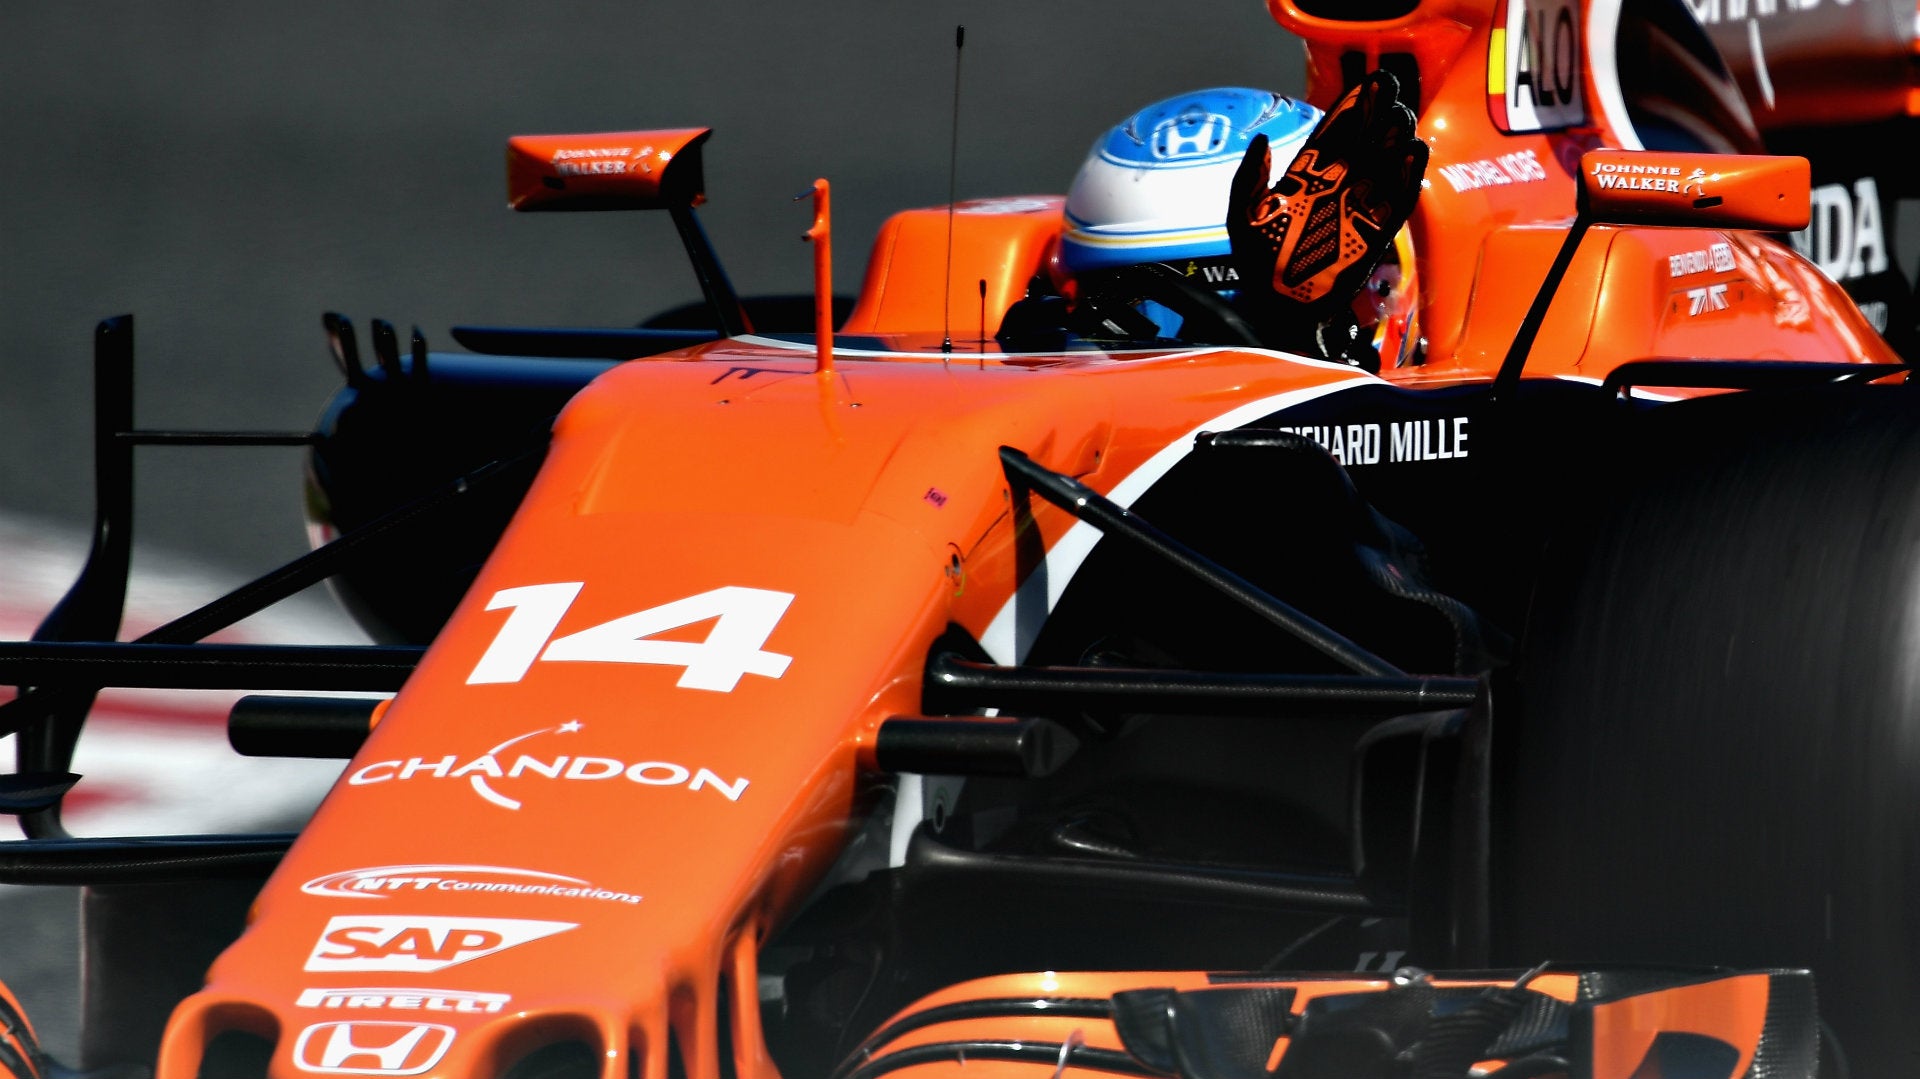 McLaren-Honda Thinks They Have "One of the Best Cars" in F1